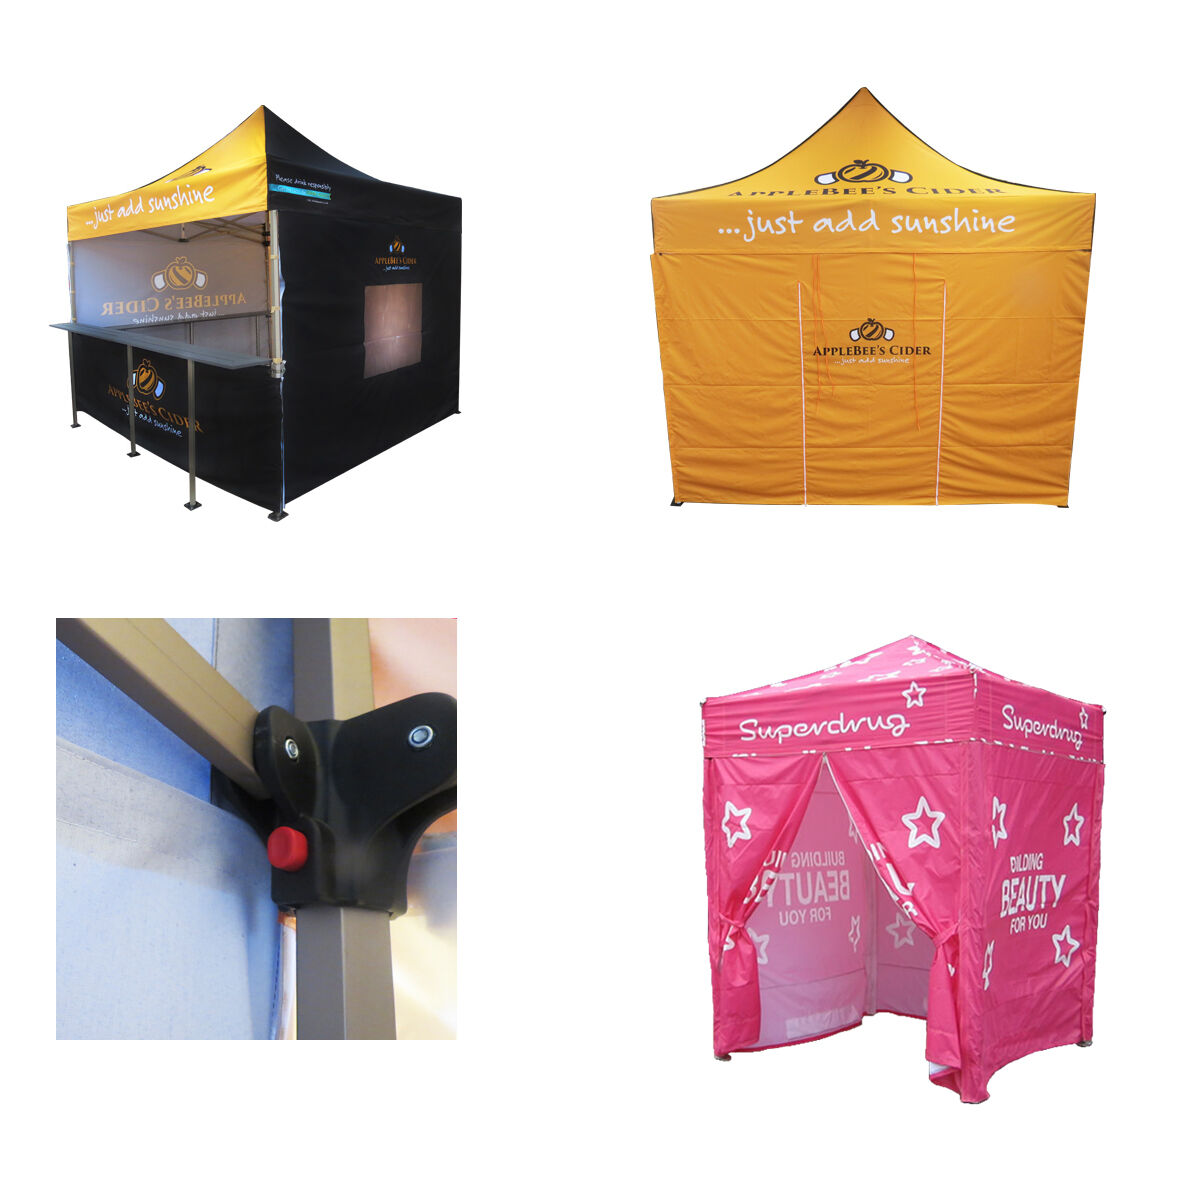 Printed Promotional Marquees and Gazebos 